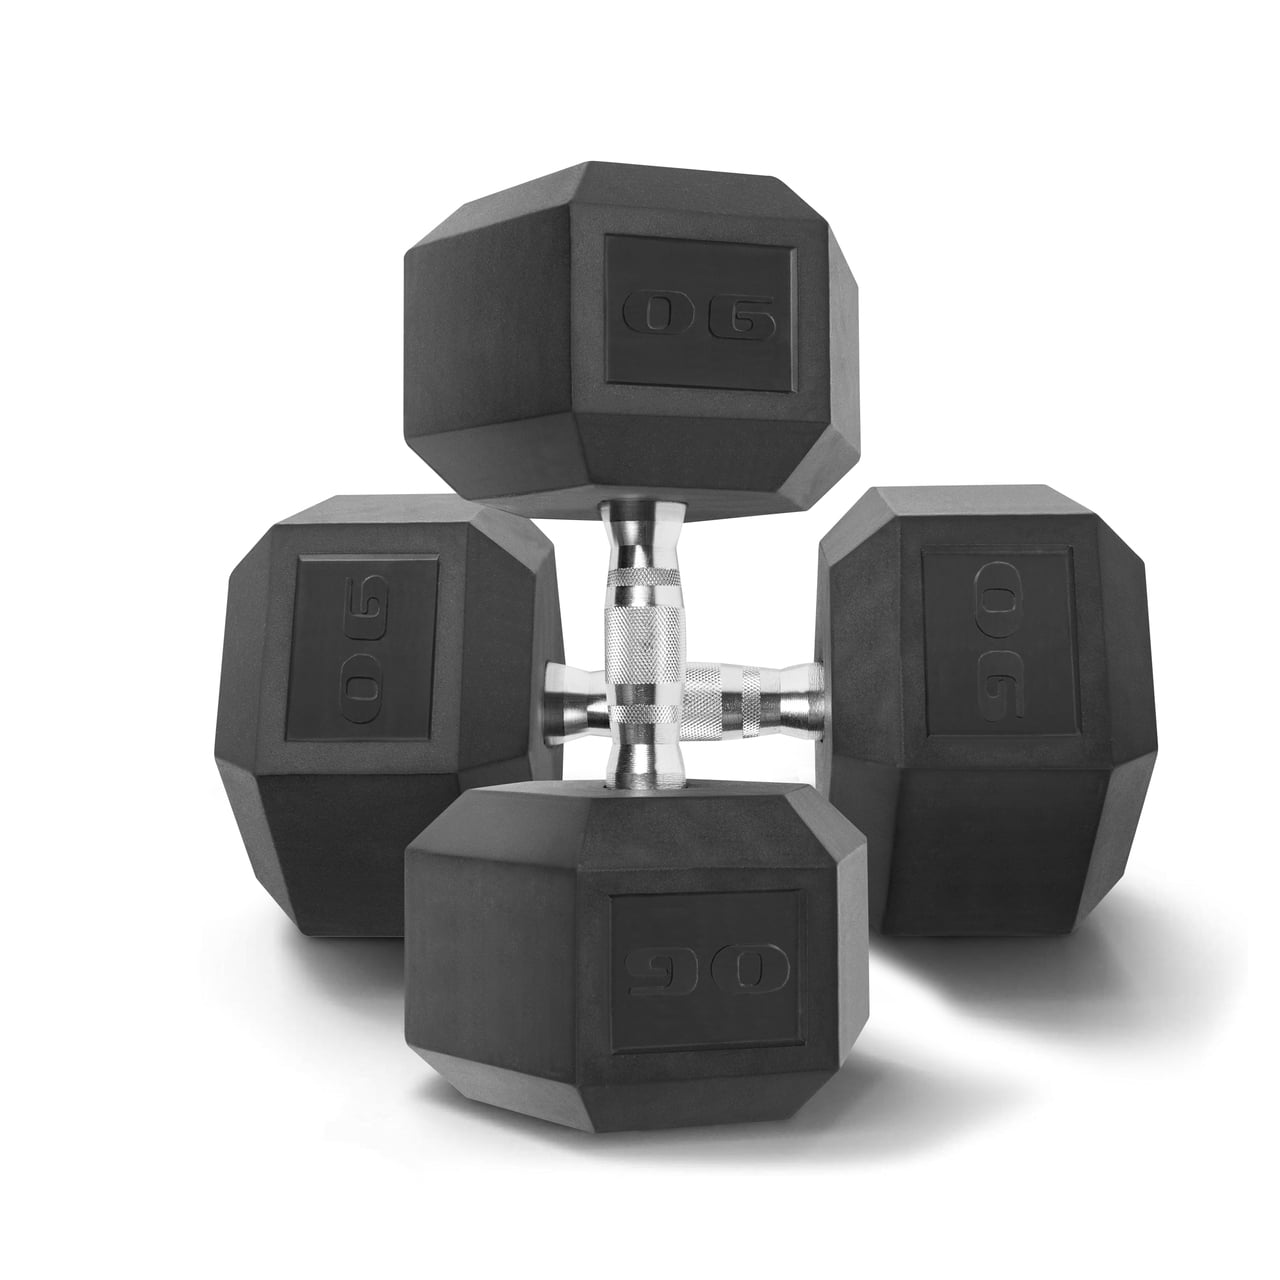 PAIR CAST IRON Rubber-Coated Hex Dumbbells CAP Barbell Weights Home Workout Gym 